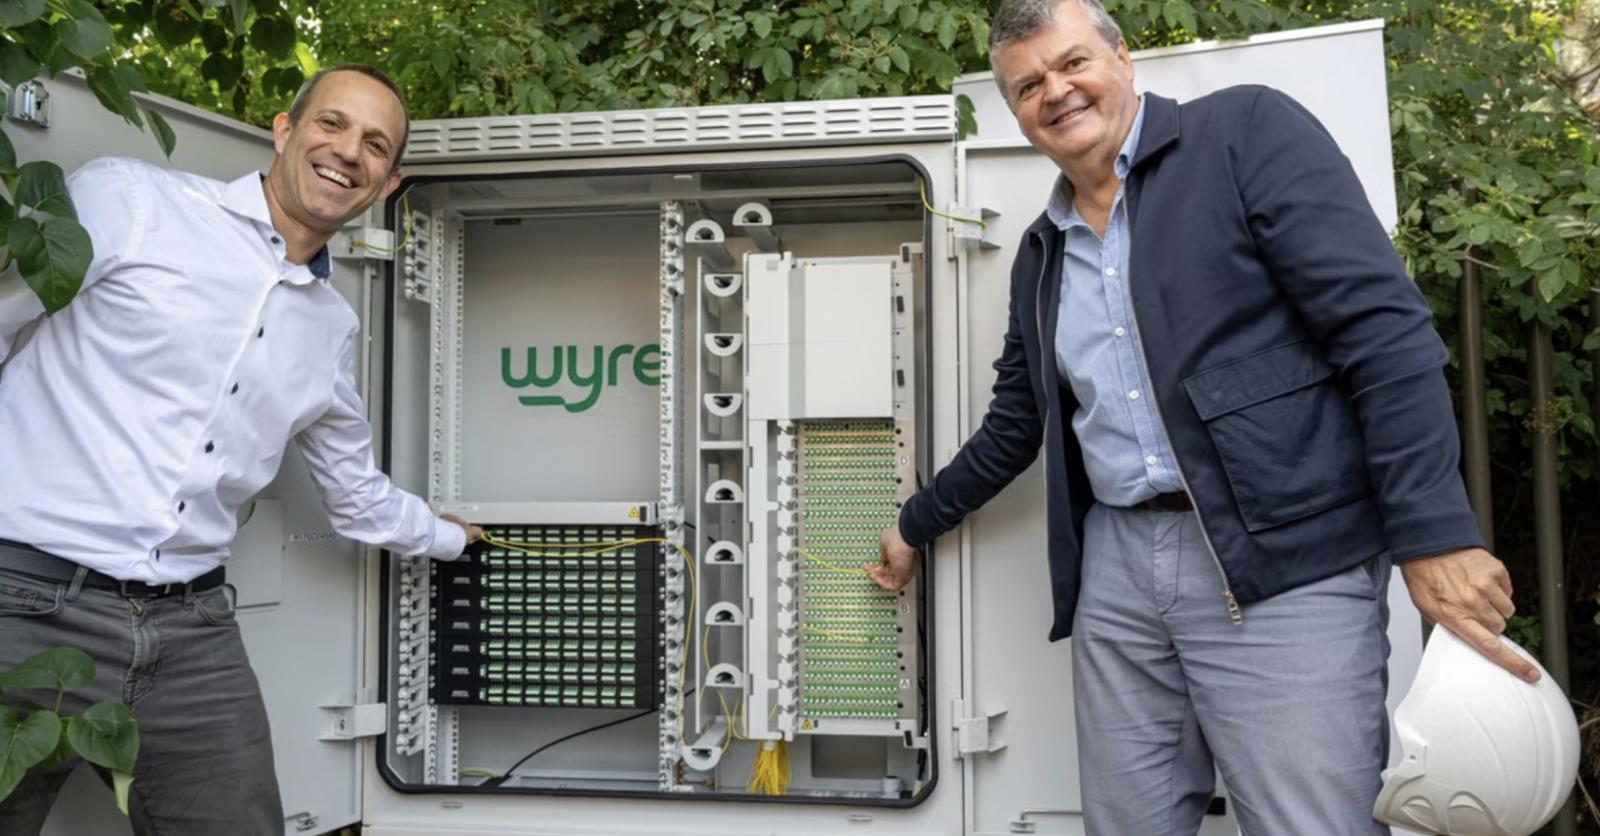 Wyre connects the first family in Mechelen with a fiber optic cable